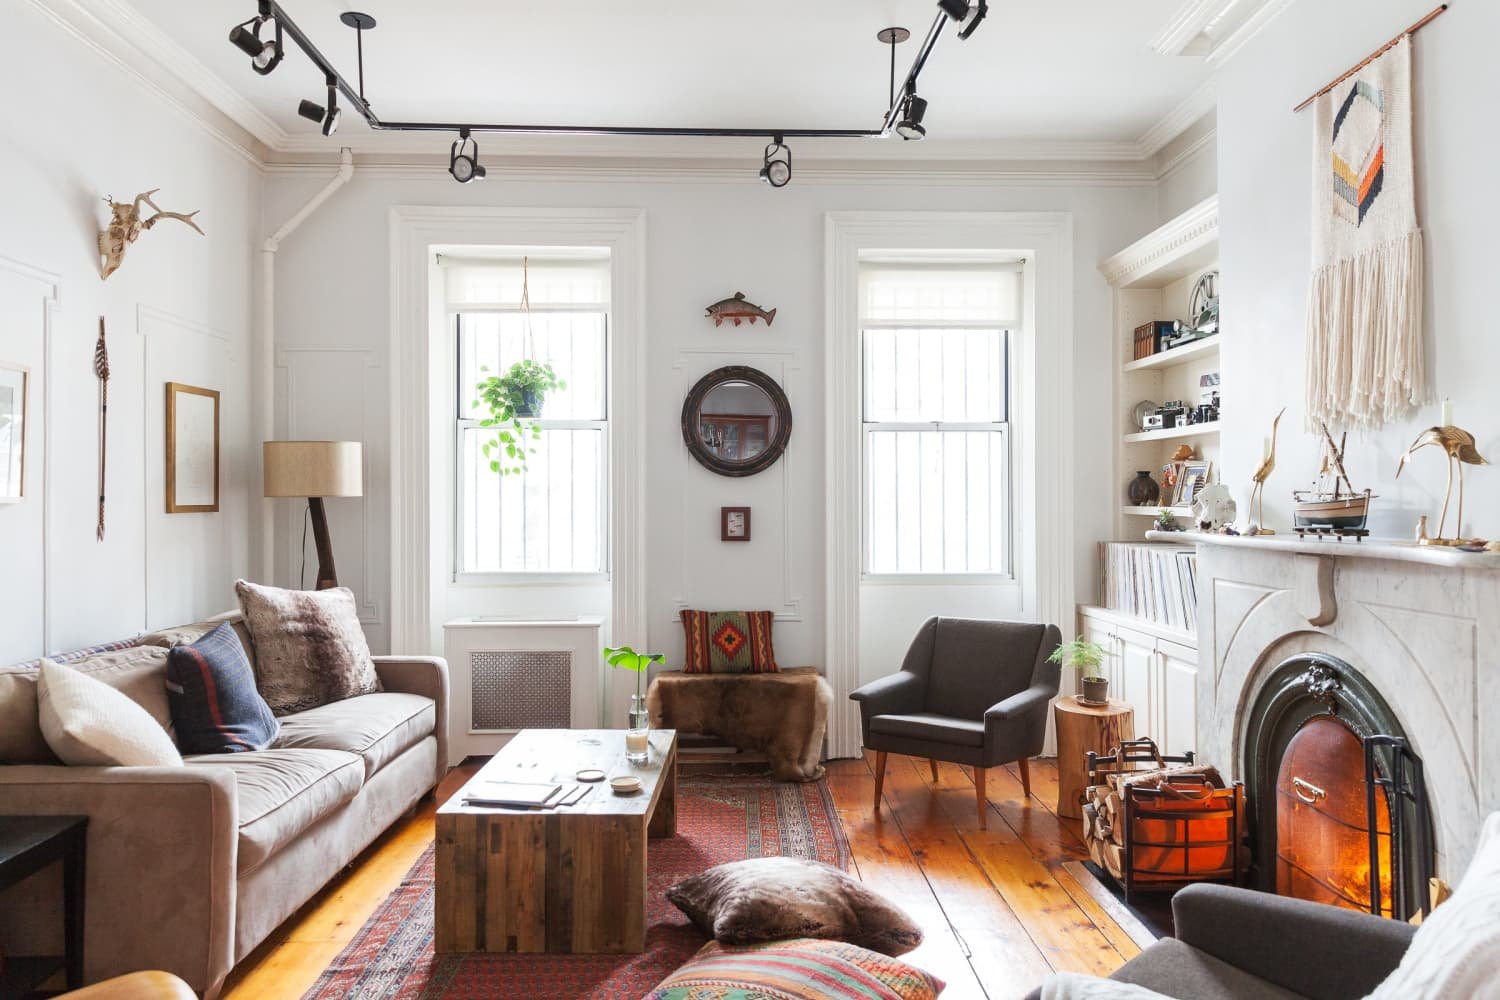 The First Thing You Should Clean When You’re Cleaning the Living Room